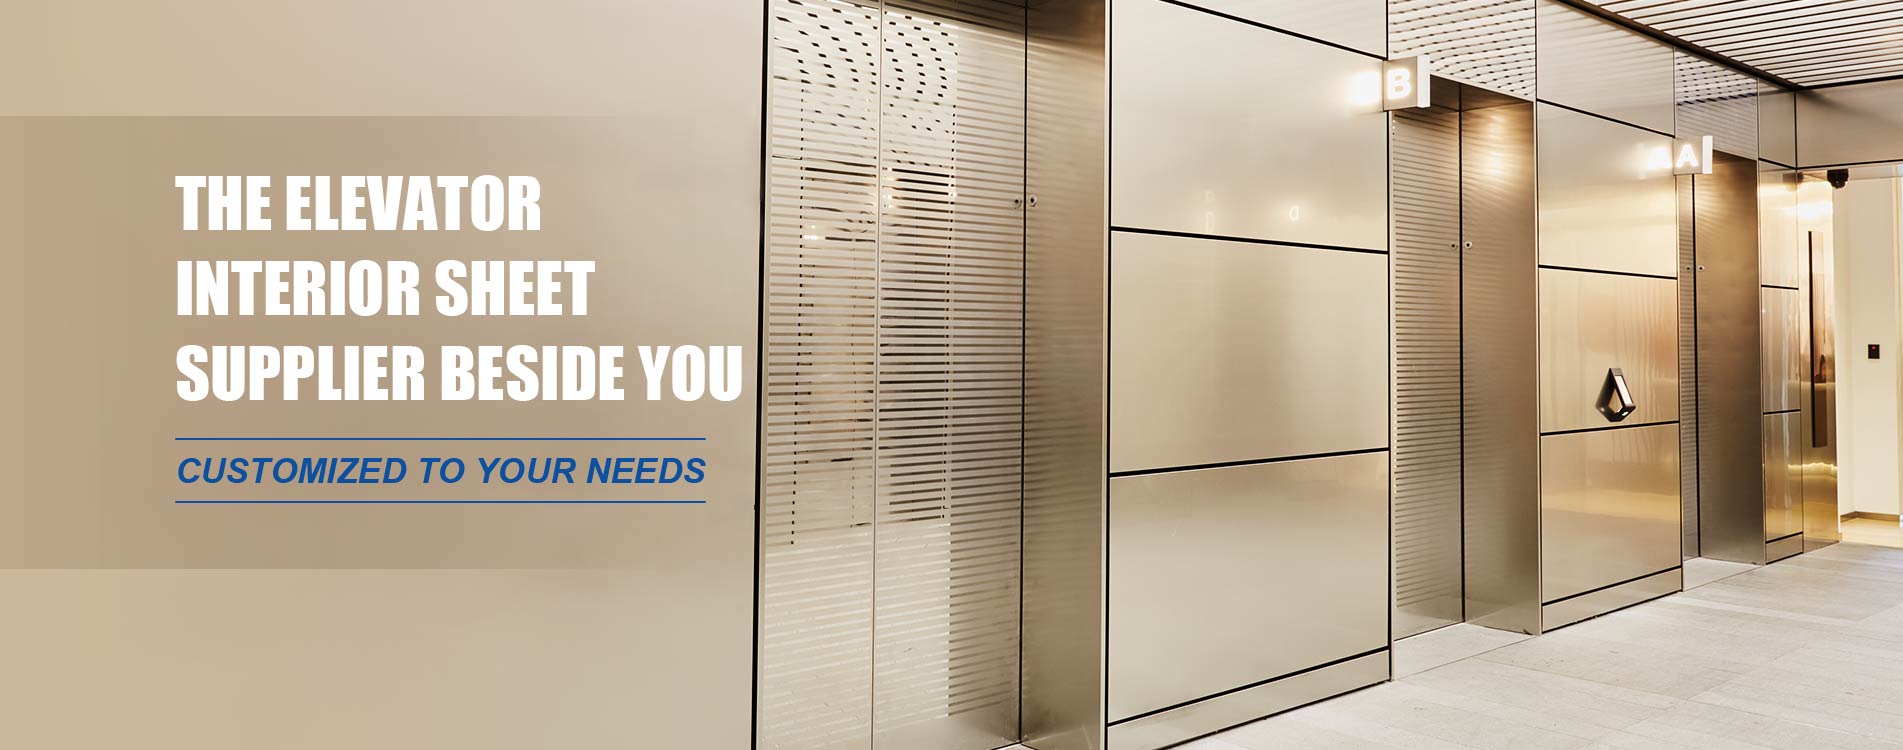 The elevator interior sheet supplier beside you